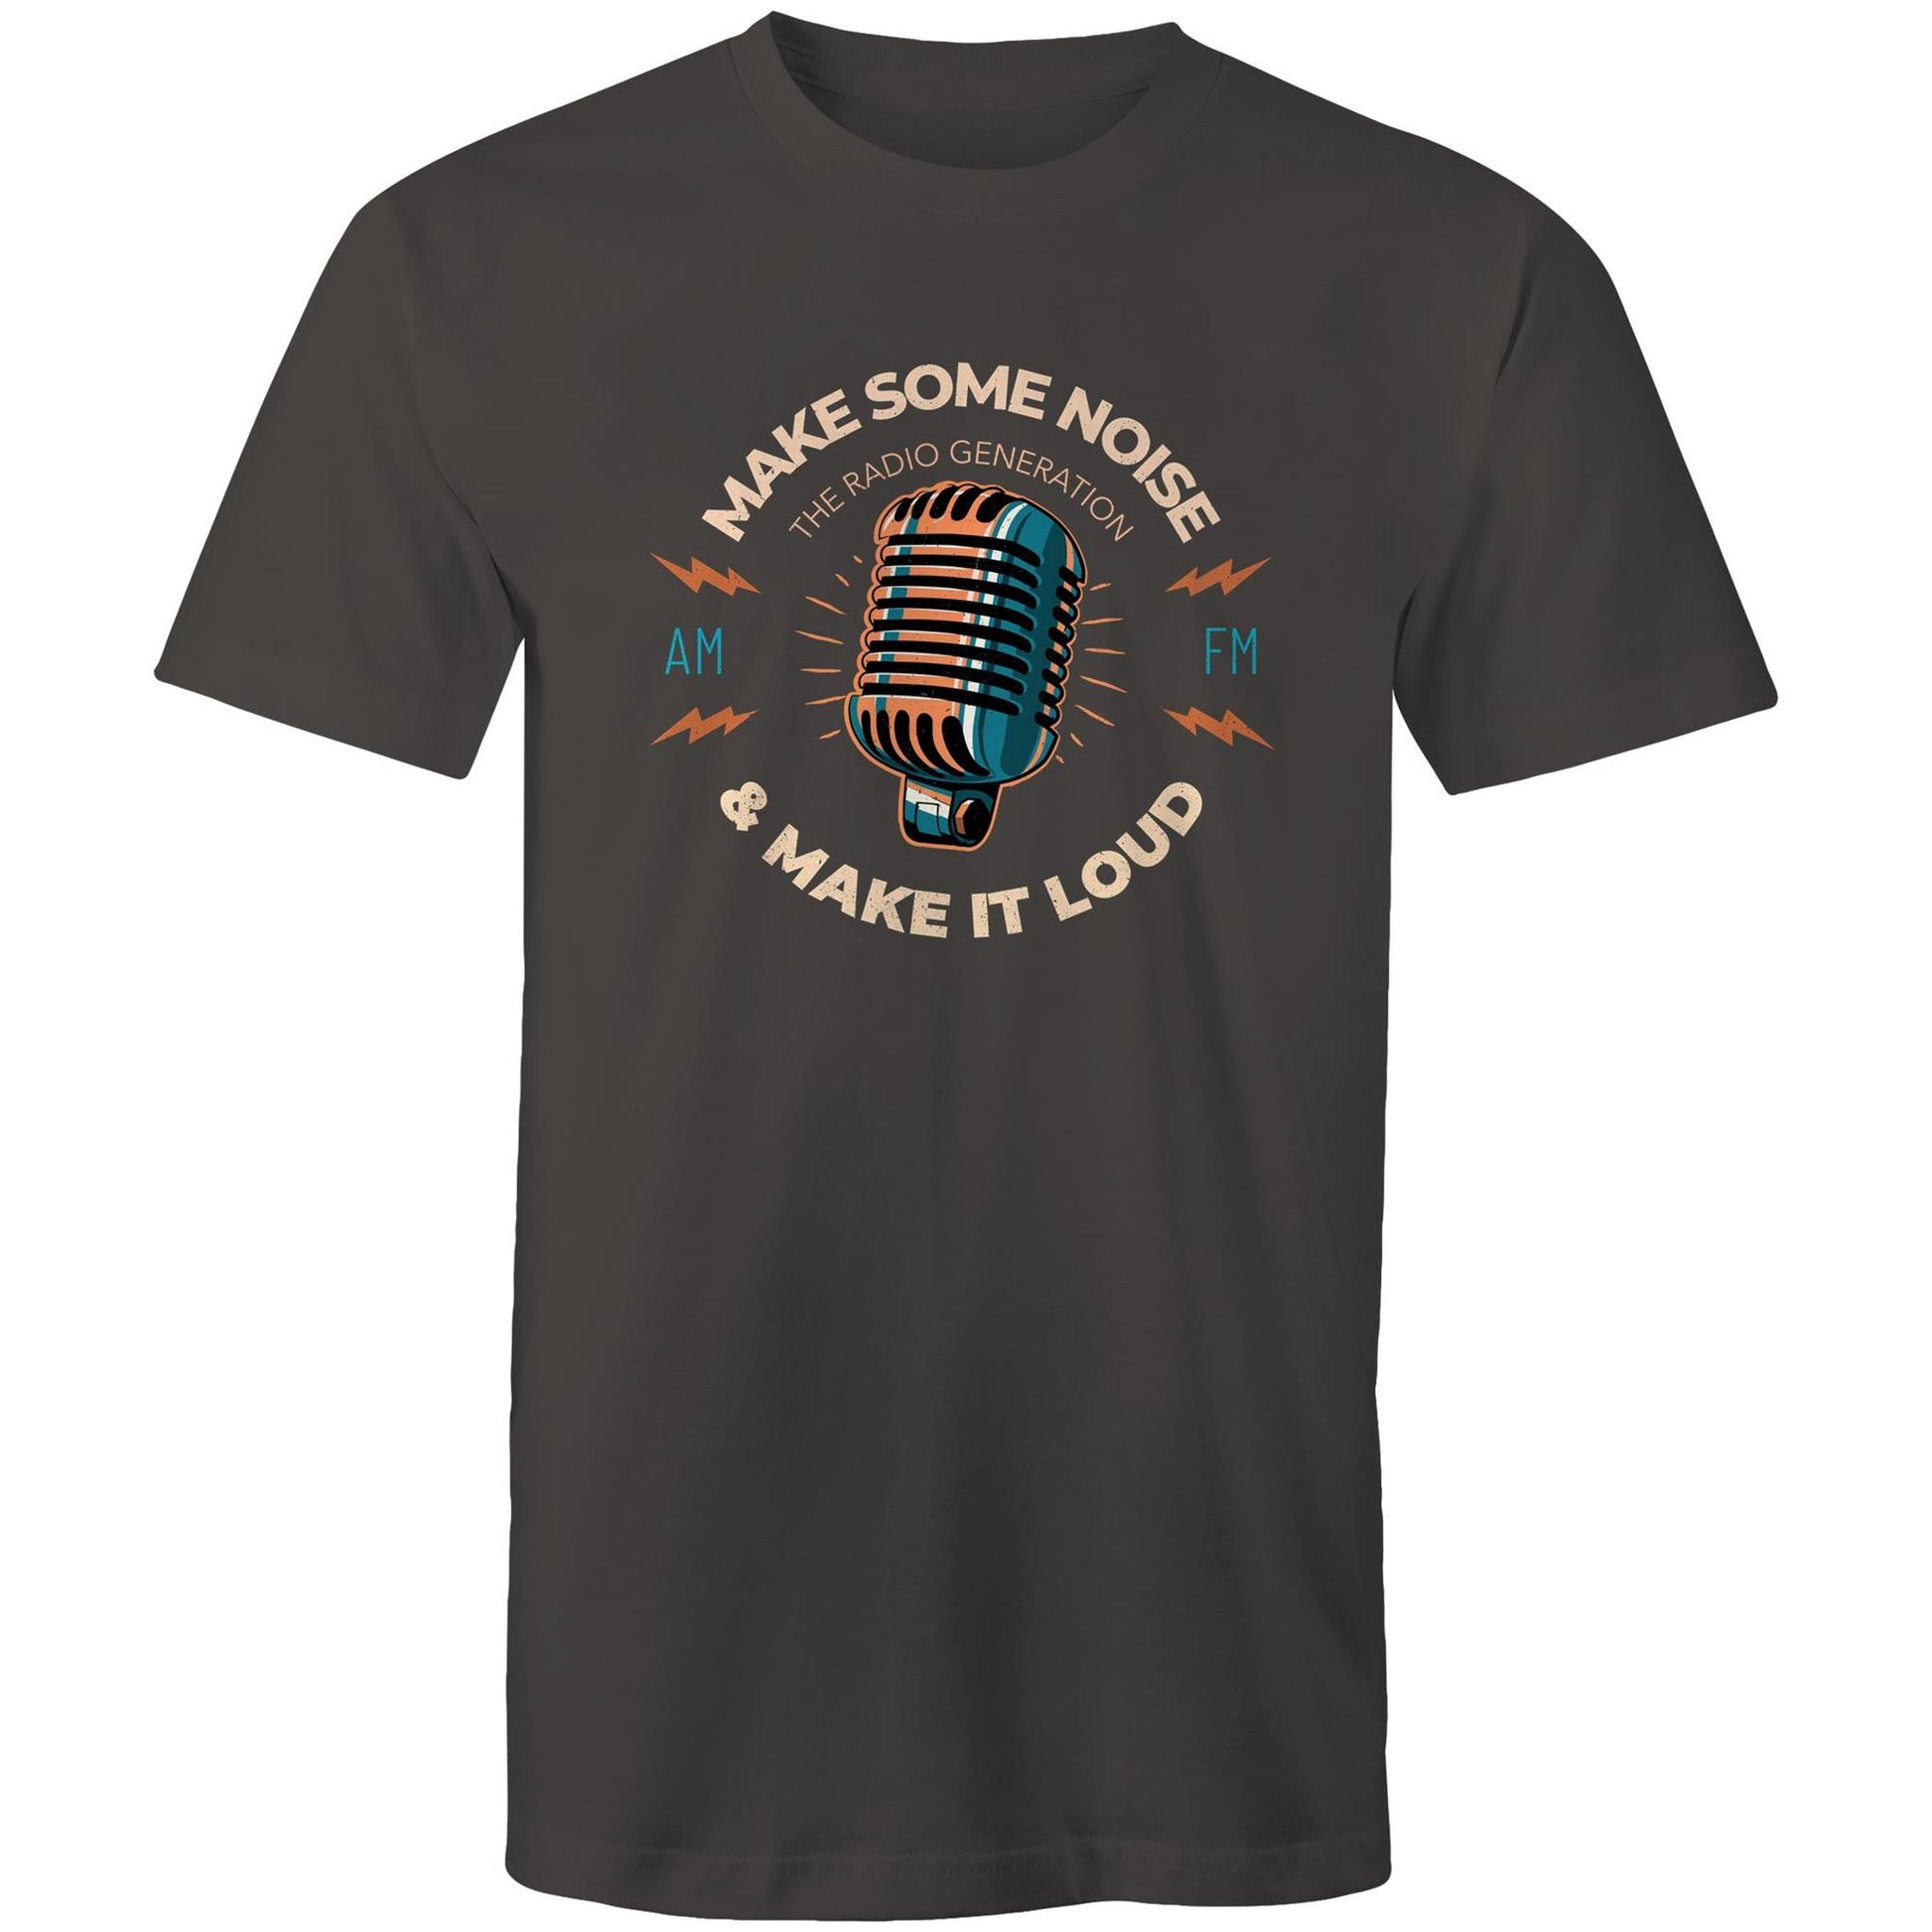 Make Some Noise And Make It Loud - Mens T-Shirt Charcoal Mens T-shirt Music